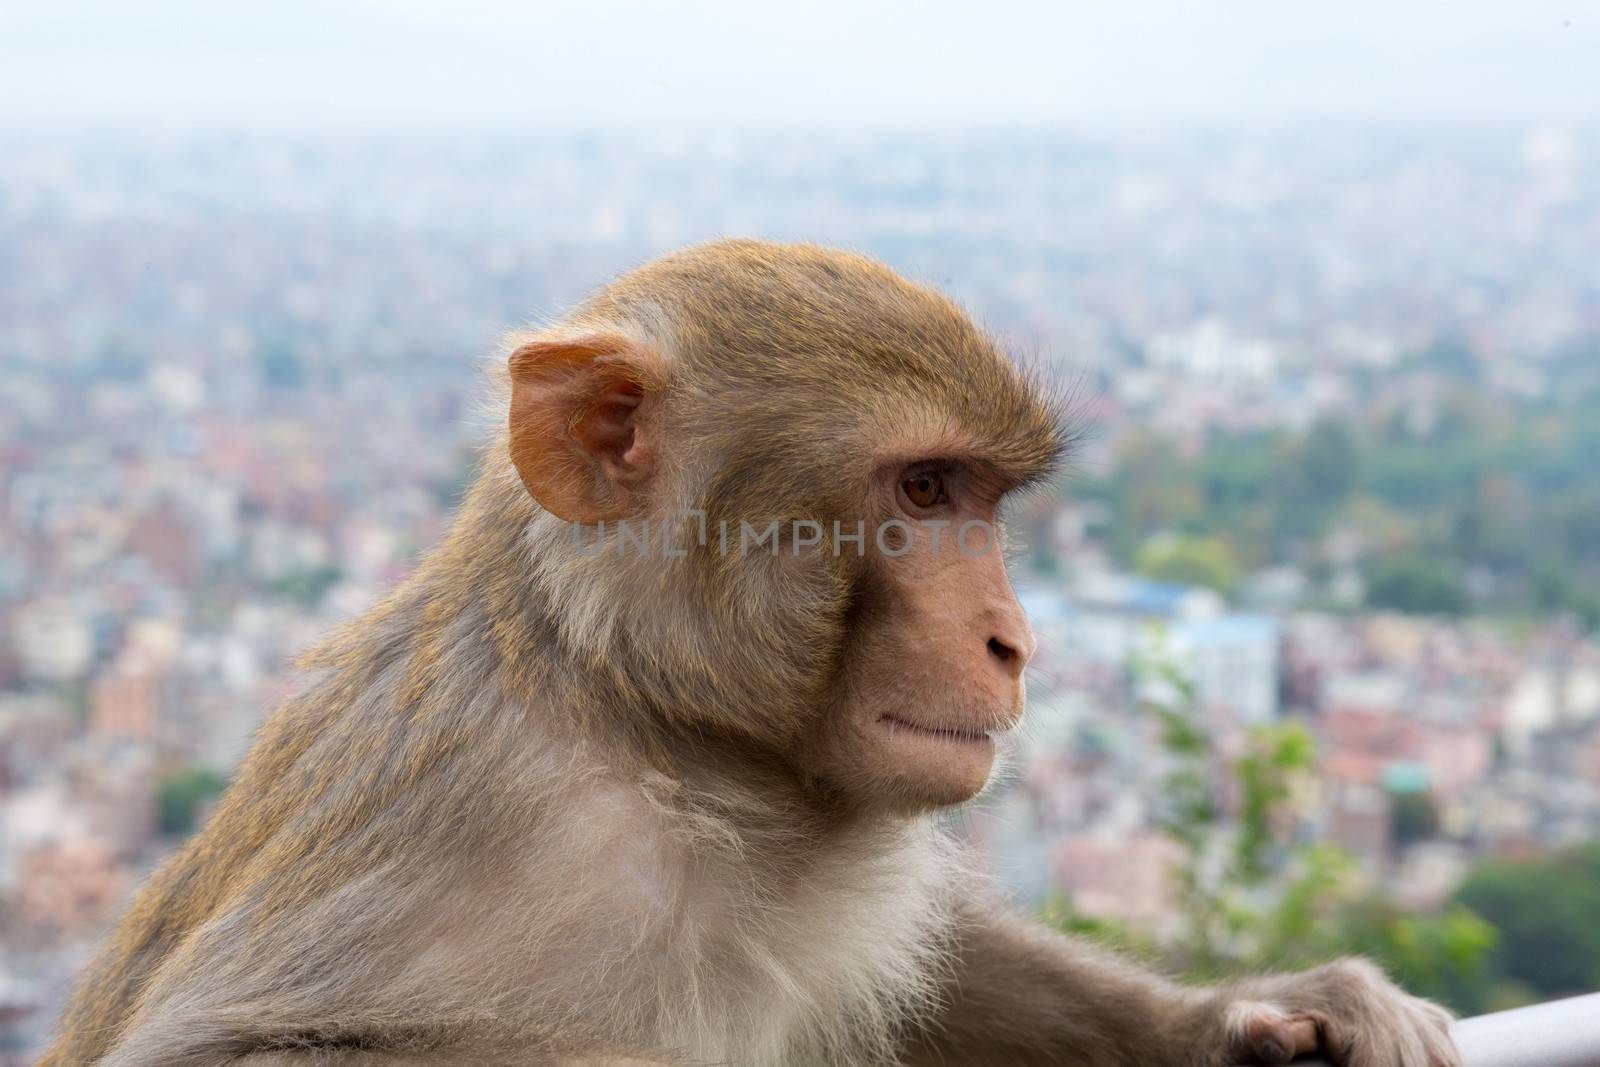 Monkey at the Monkey temple in Kathmandu. Swayambhunath is an ancient religious complex atop a hill in the Kathmandu Valley, west of Kathmandu city. It is also known as the Monkey Temple as there are holy monkeys living in the north-west parts of the temple.